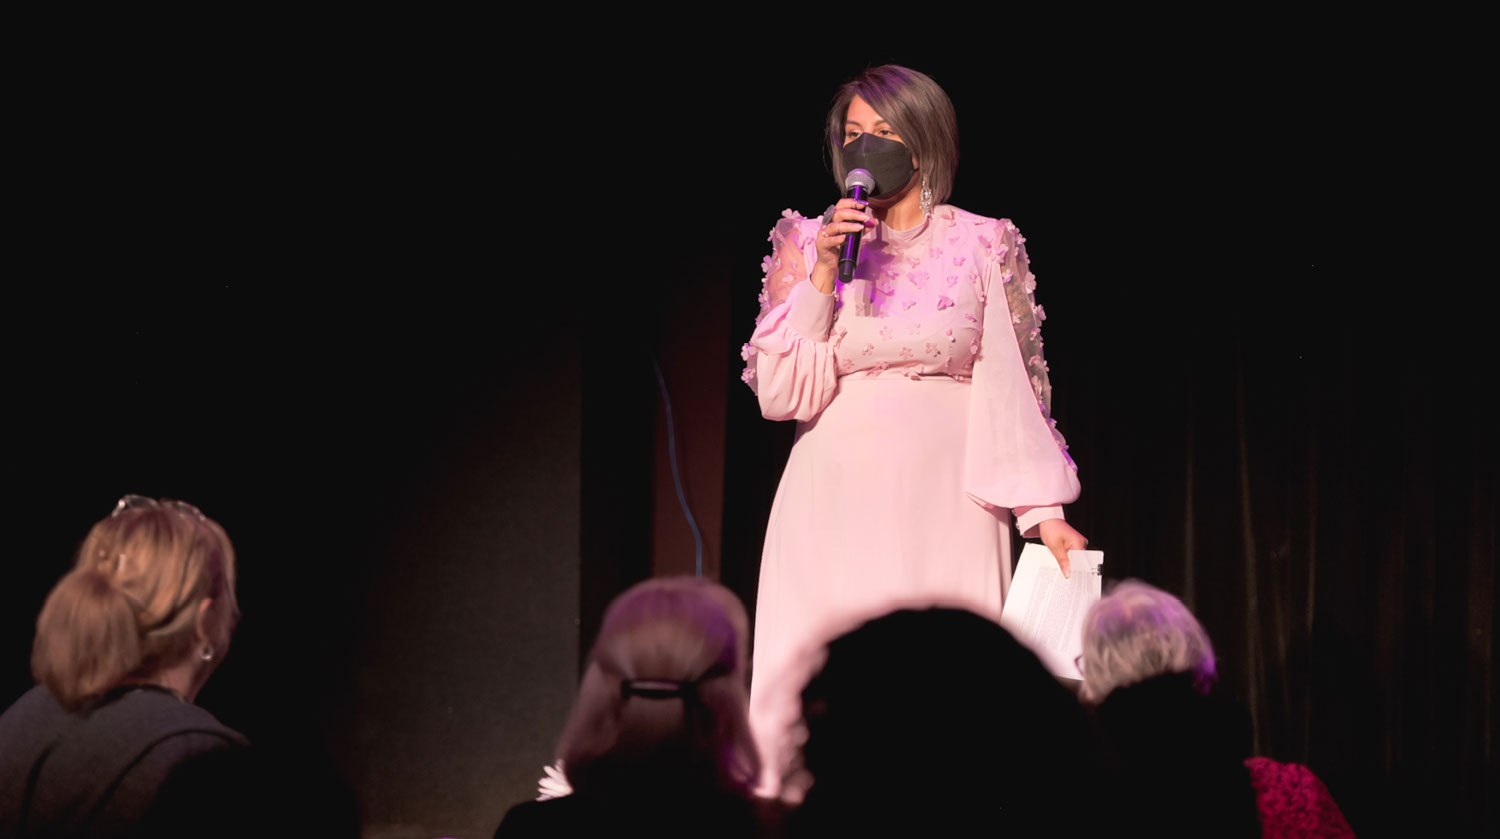 Image of a woman speaking into a microphone before a crowd of seated people. The woman has shoulder length brown hair and medium-toned skin. She wears a black mask and ornate dangling, silver earrings. She is outfitted in a long, light pink dress with sheer flowy sleeves. The top of the dress is embellished with flowers. The room beyond her is dimly lit. 